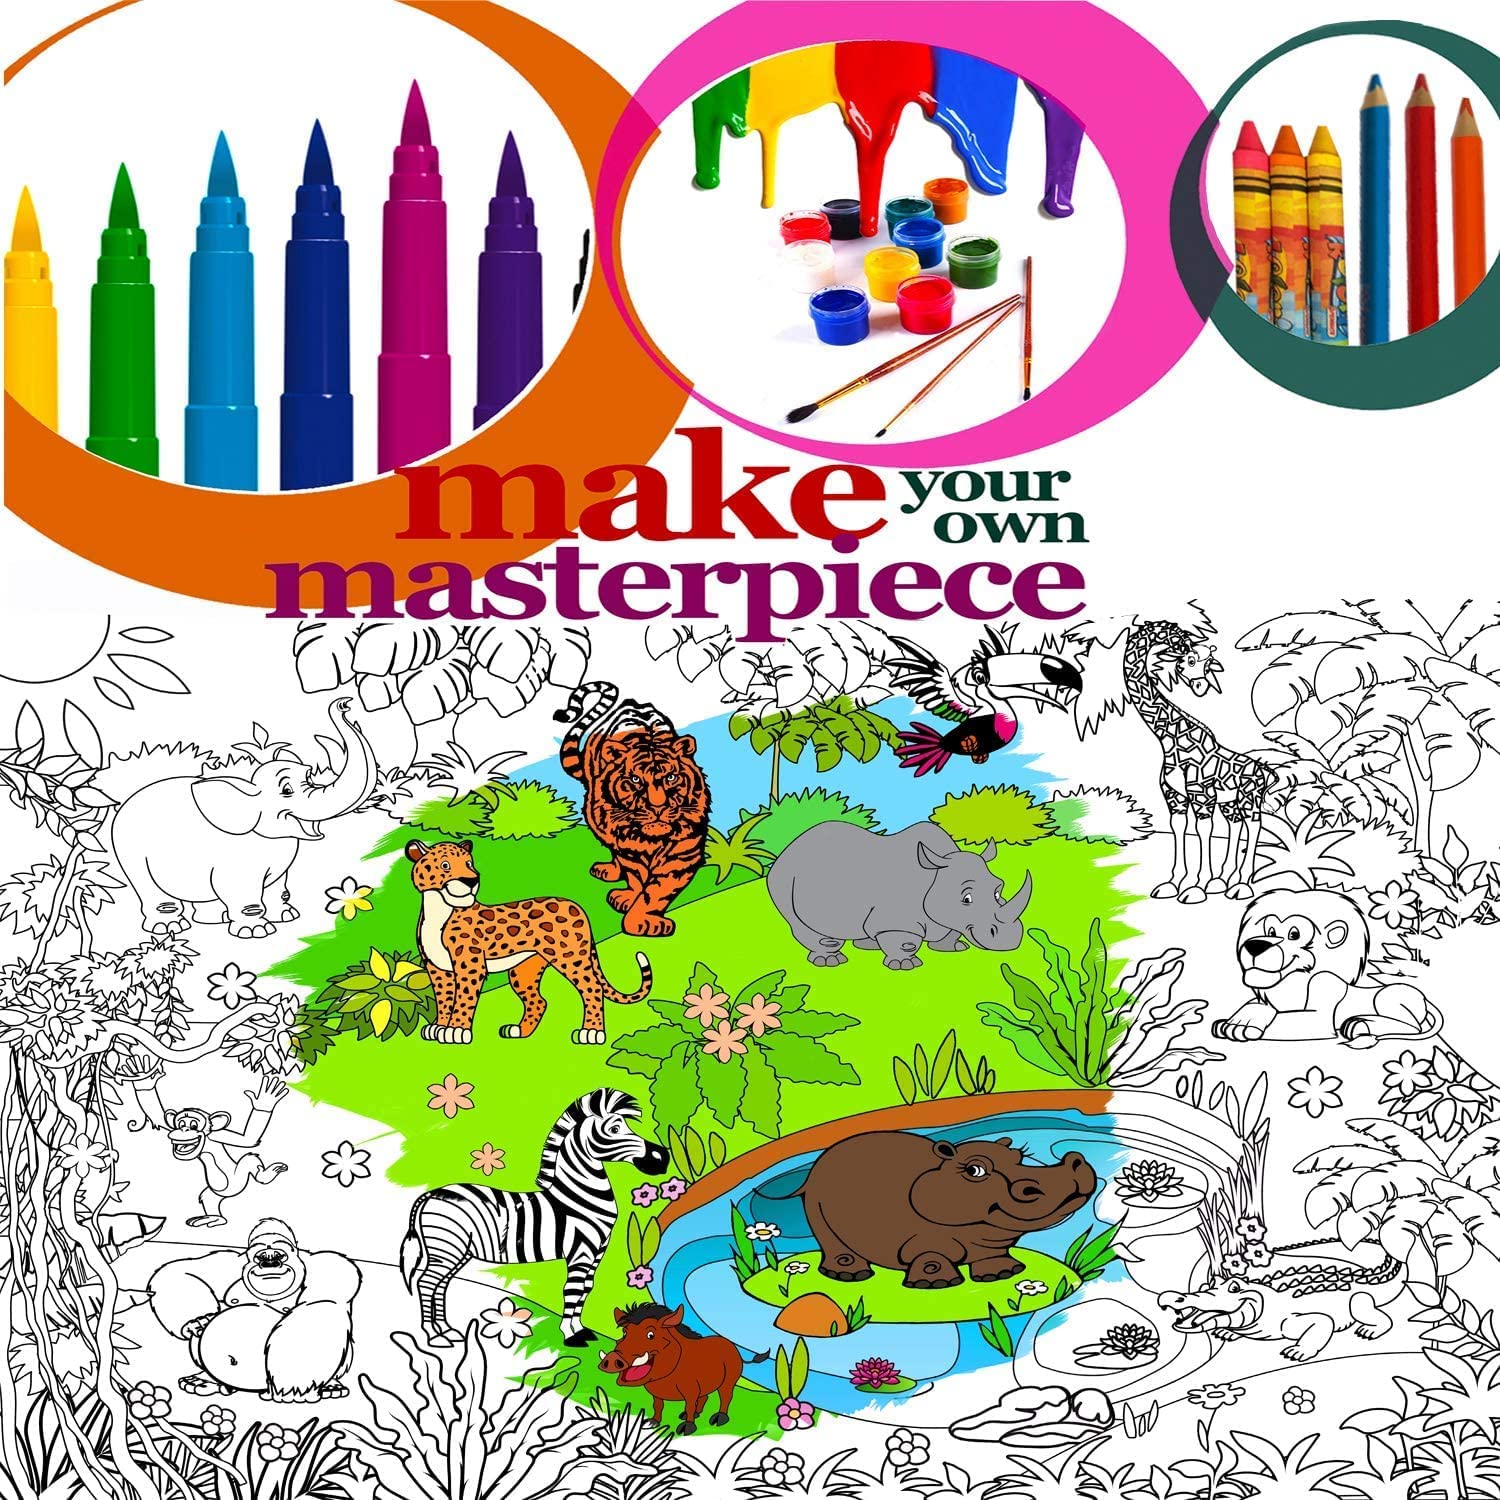 A coloring poster for children in the shapes of forest animals